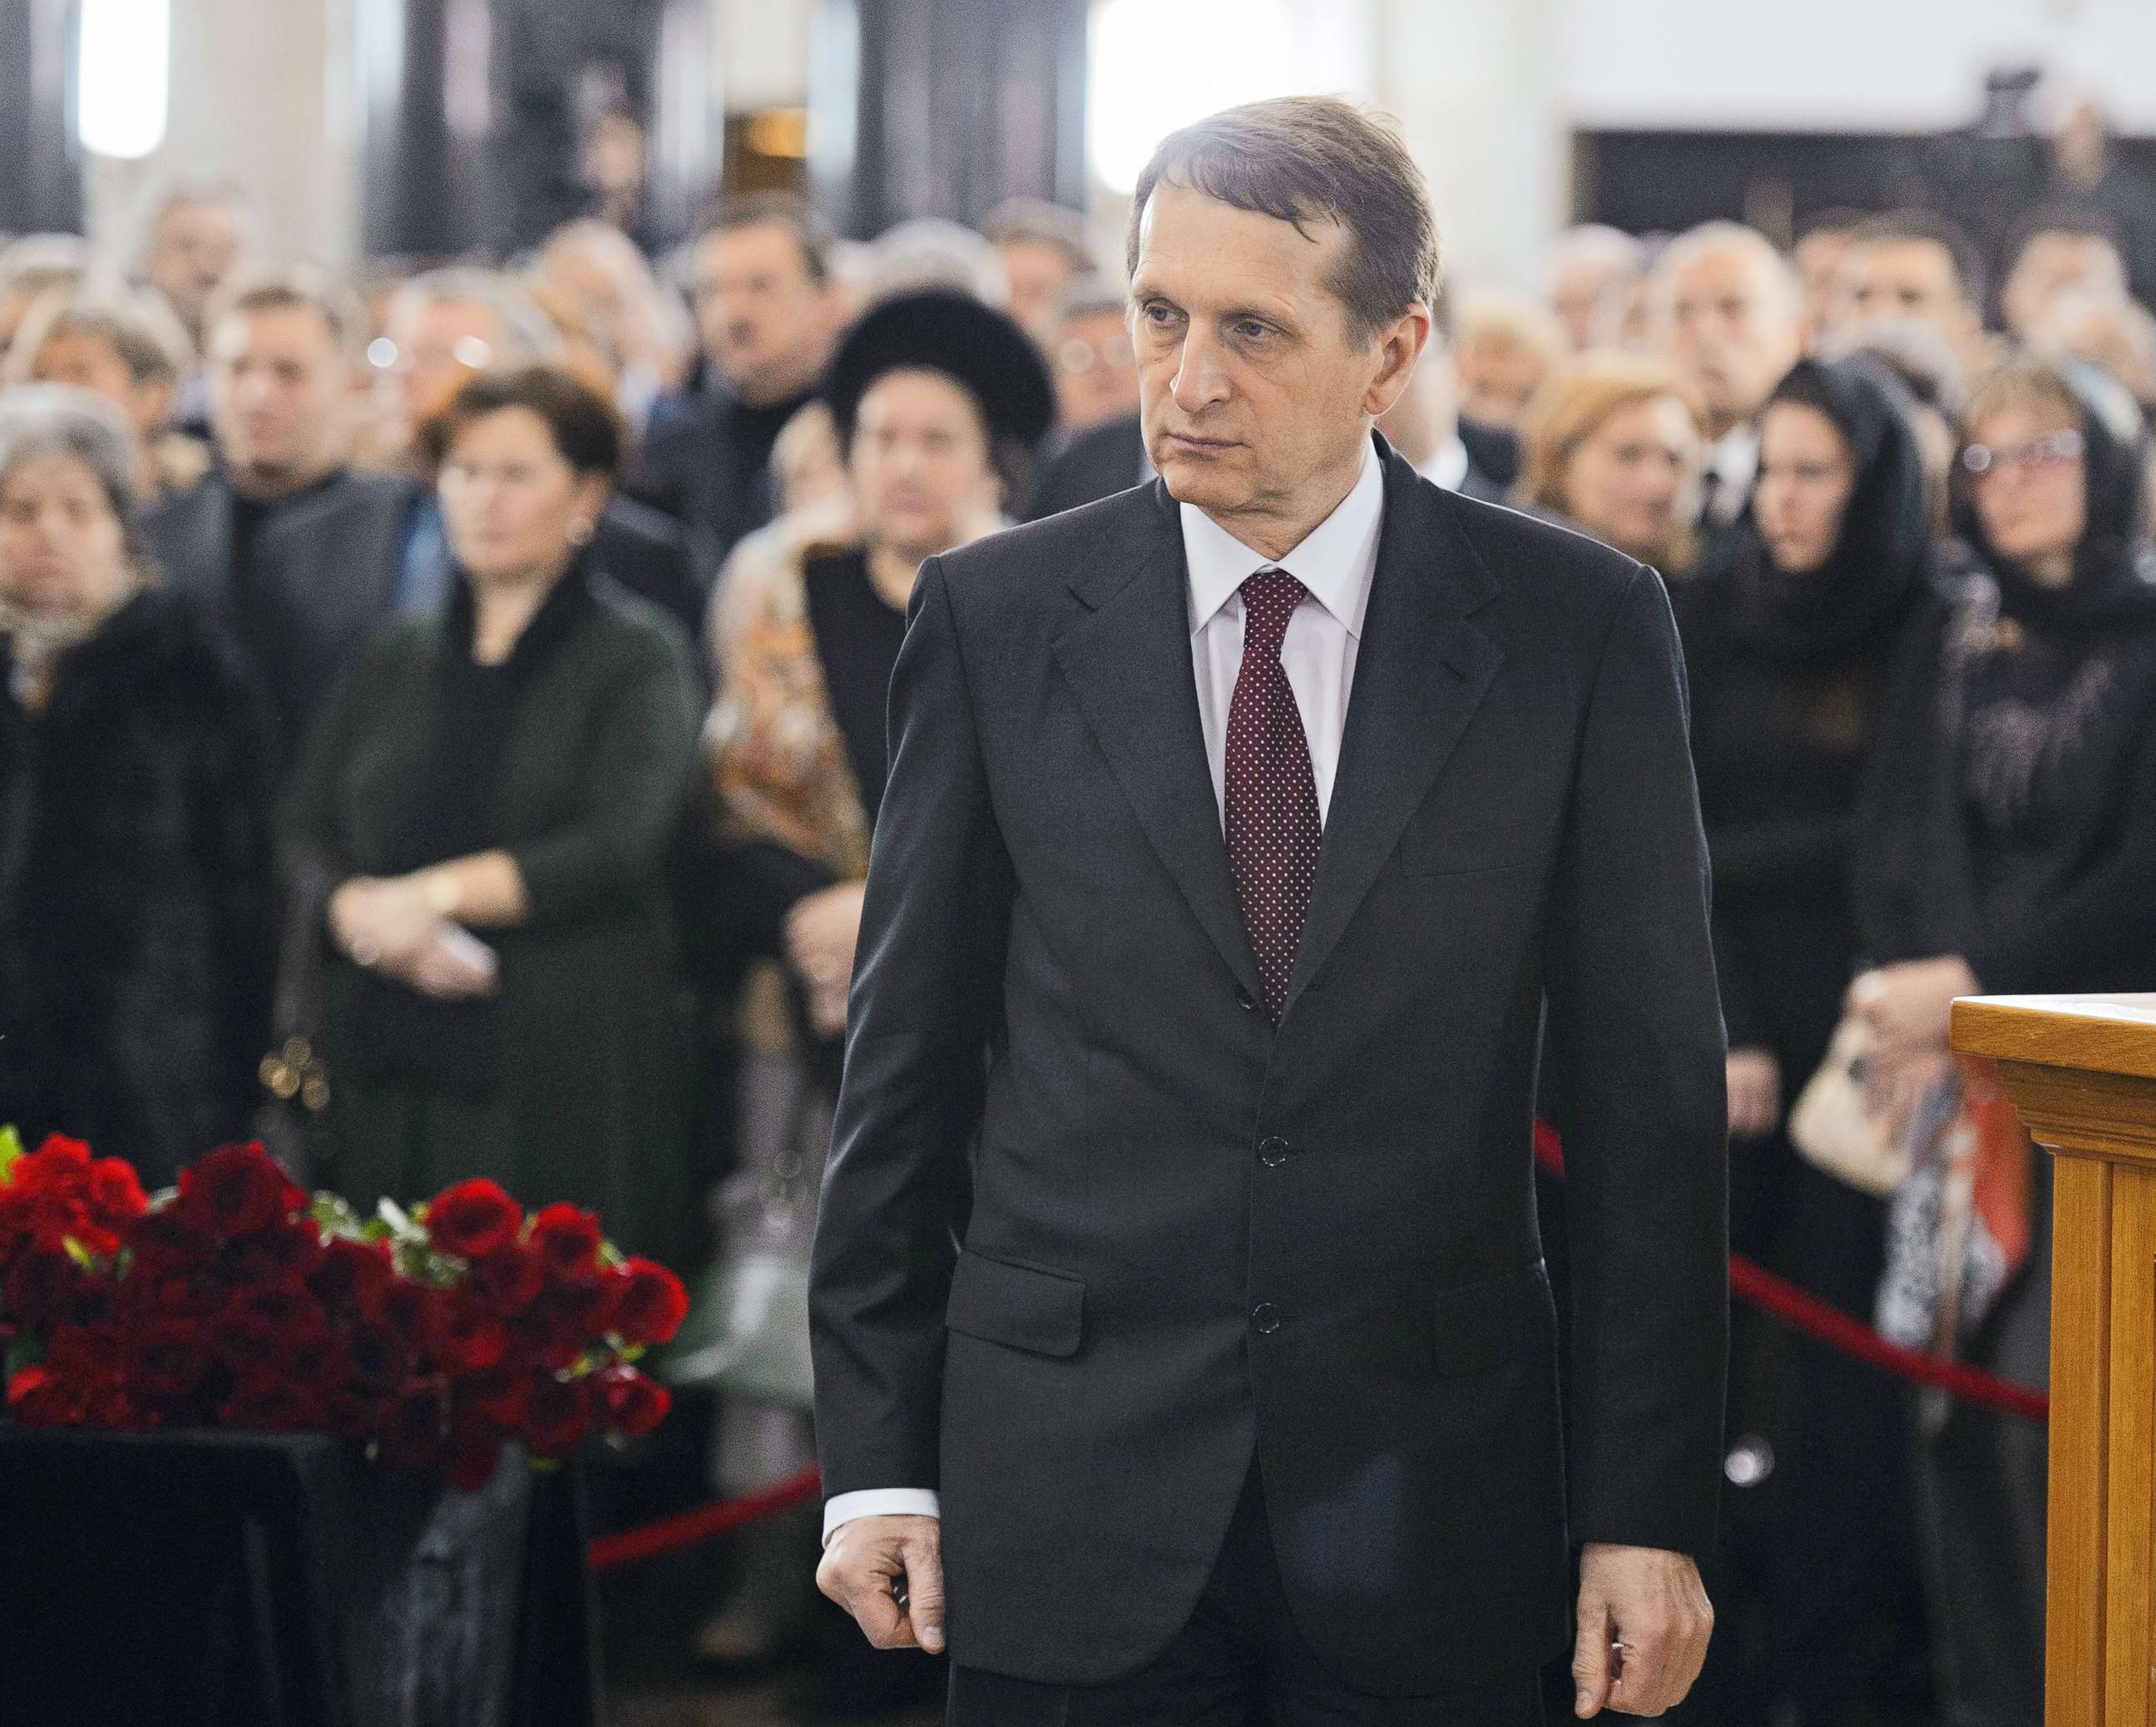 PHOTO: Director of the Foreign Intelligence Service Sergey Naryshkin attends a farewell ceremony for Russian Ambassador to Turkey Andrey Karlov at the Russian Foreign Ministry on Dec. 22, 2016 in Moscow.